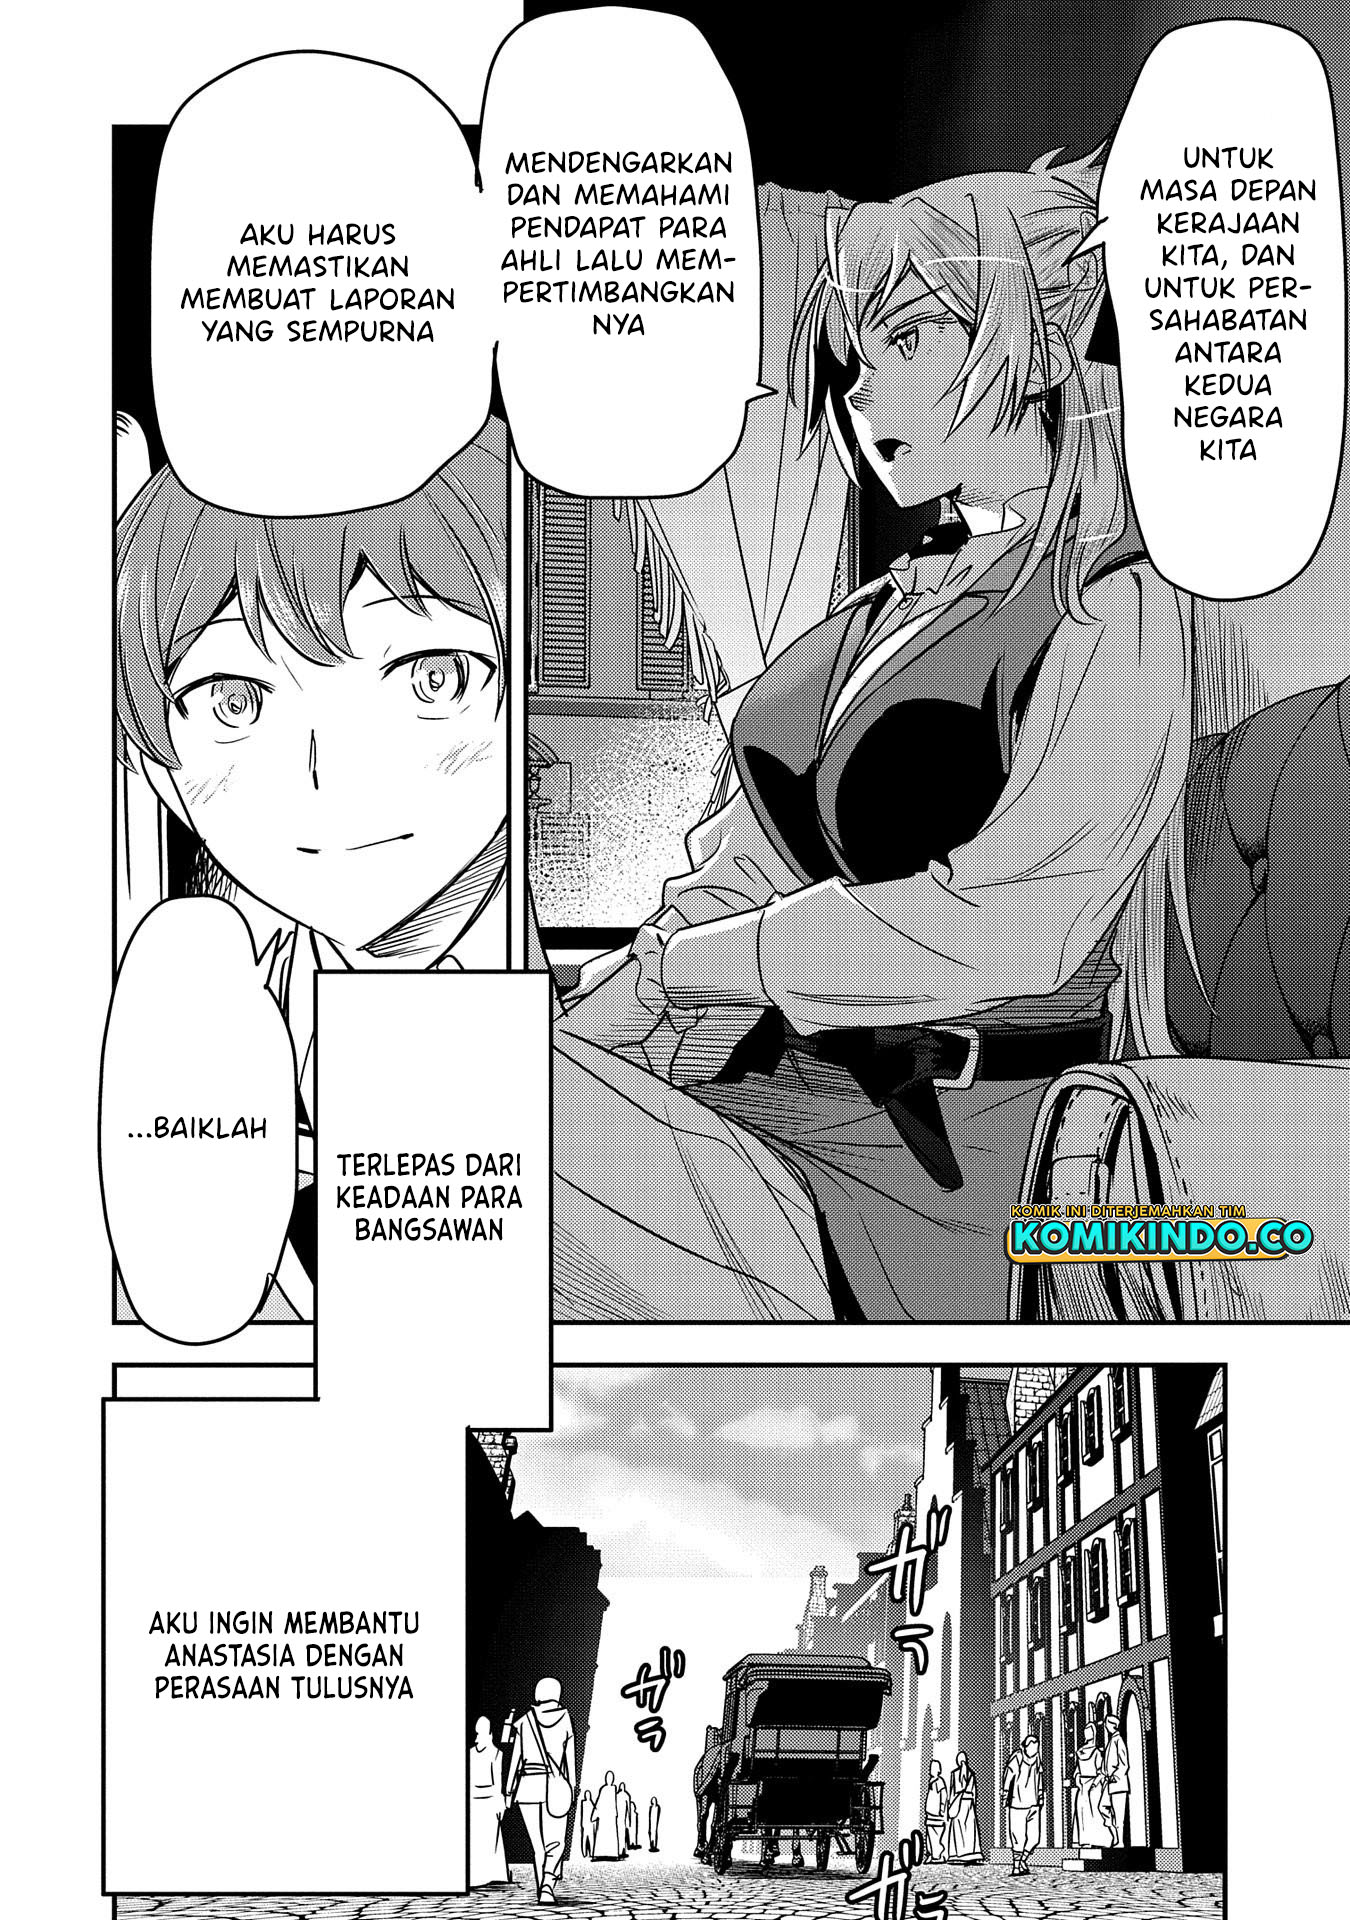 Villager A Wants to Save the Villainess no Matter What! Chapter 18